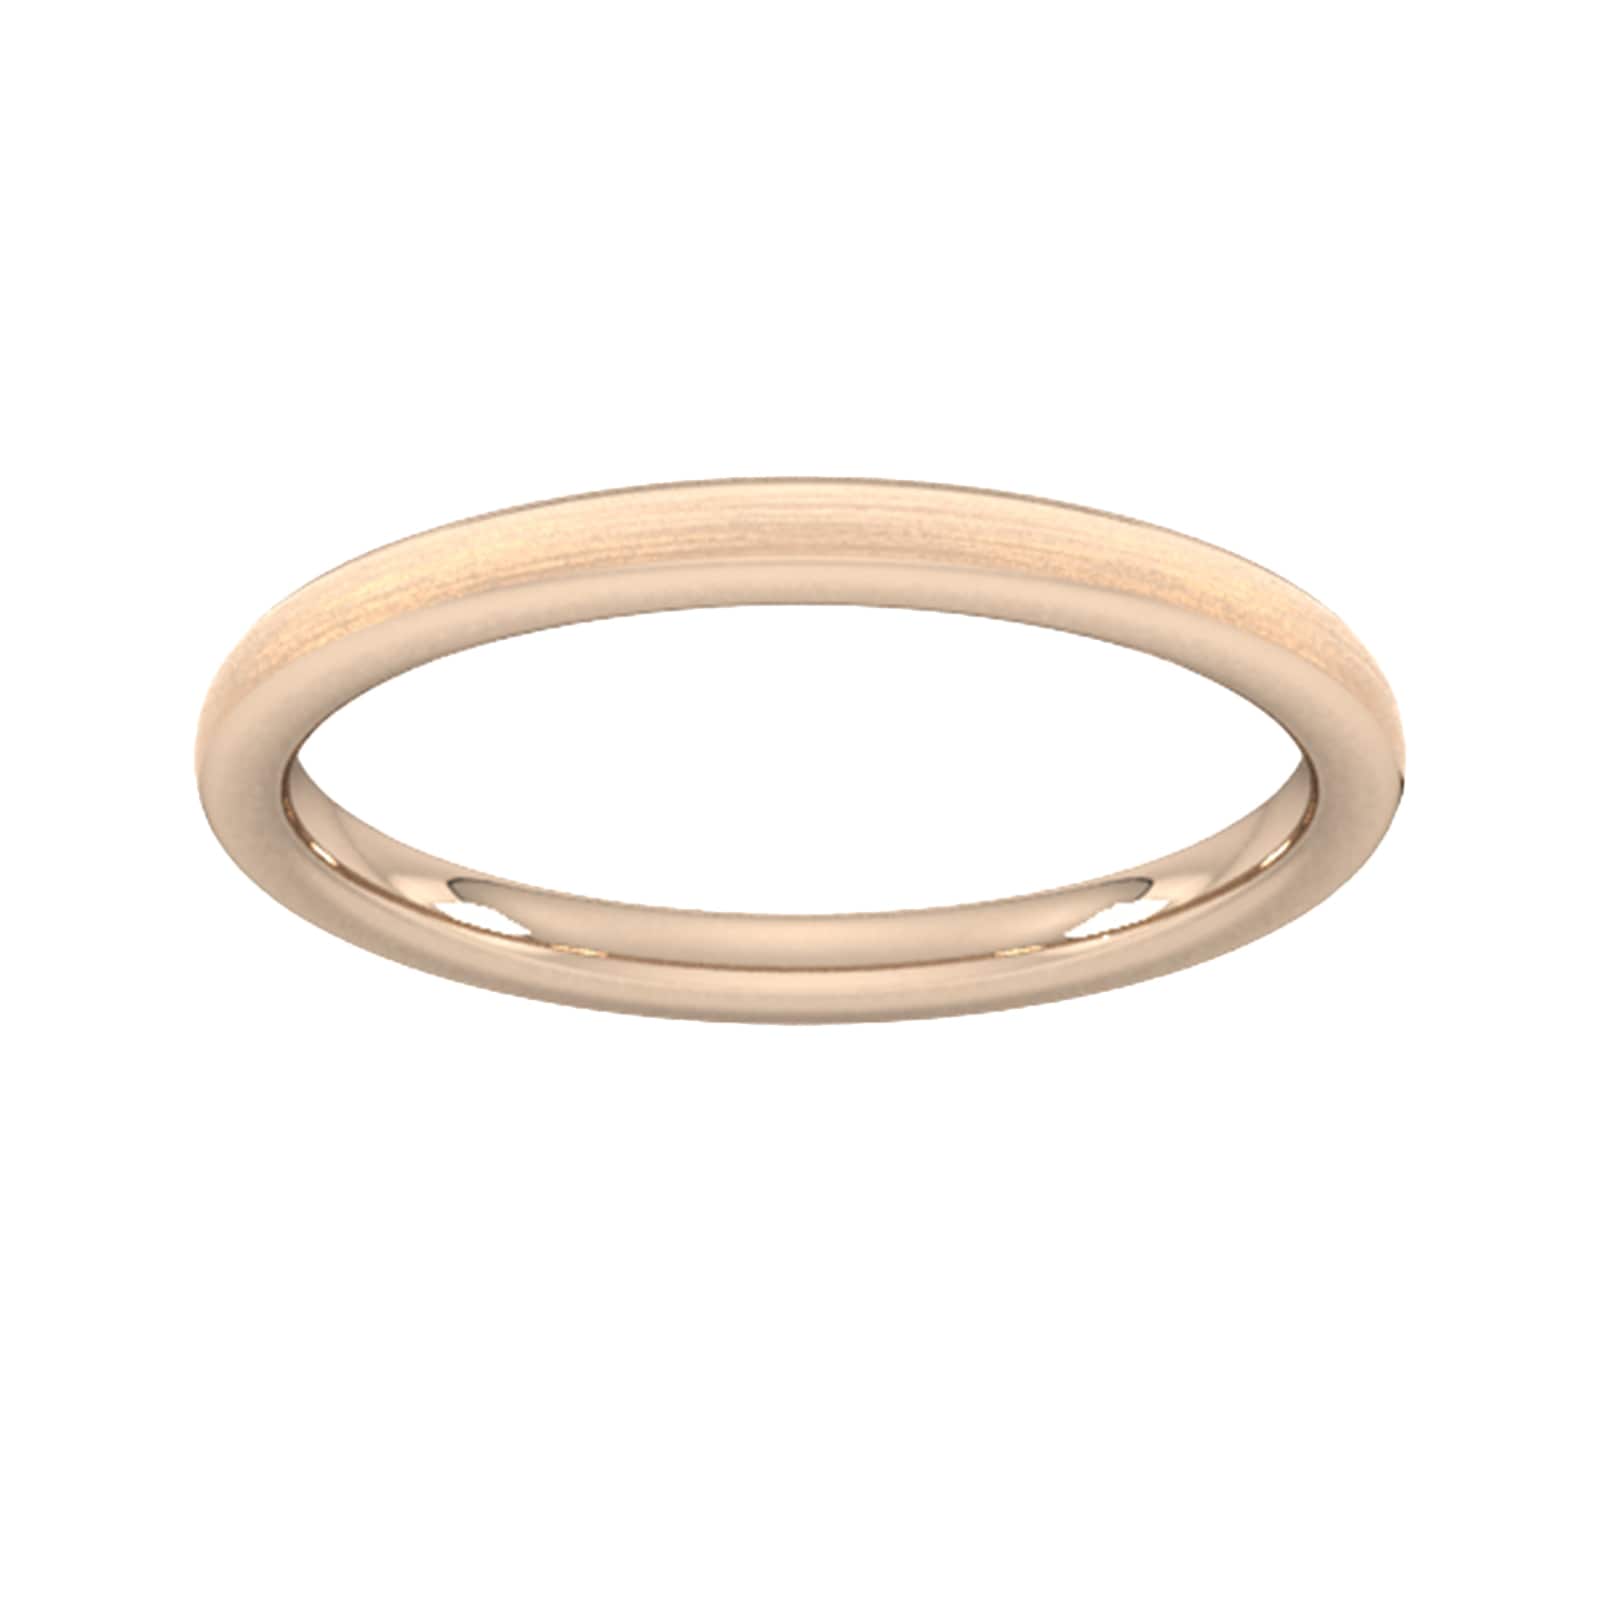 2mm traditional court heavy matt finished wedding ring in 9 carat rose gold - ring size o